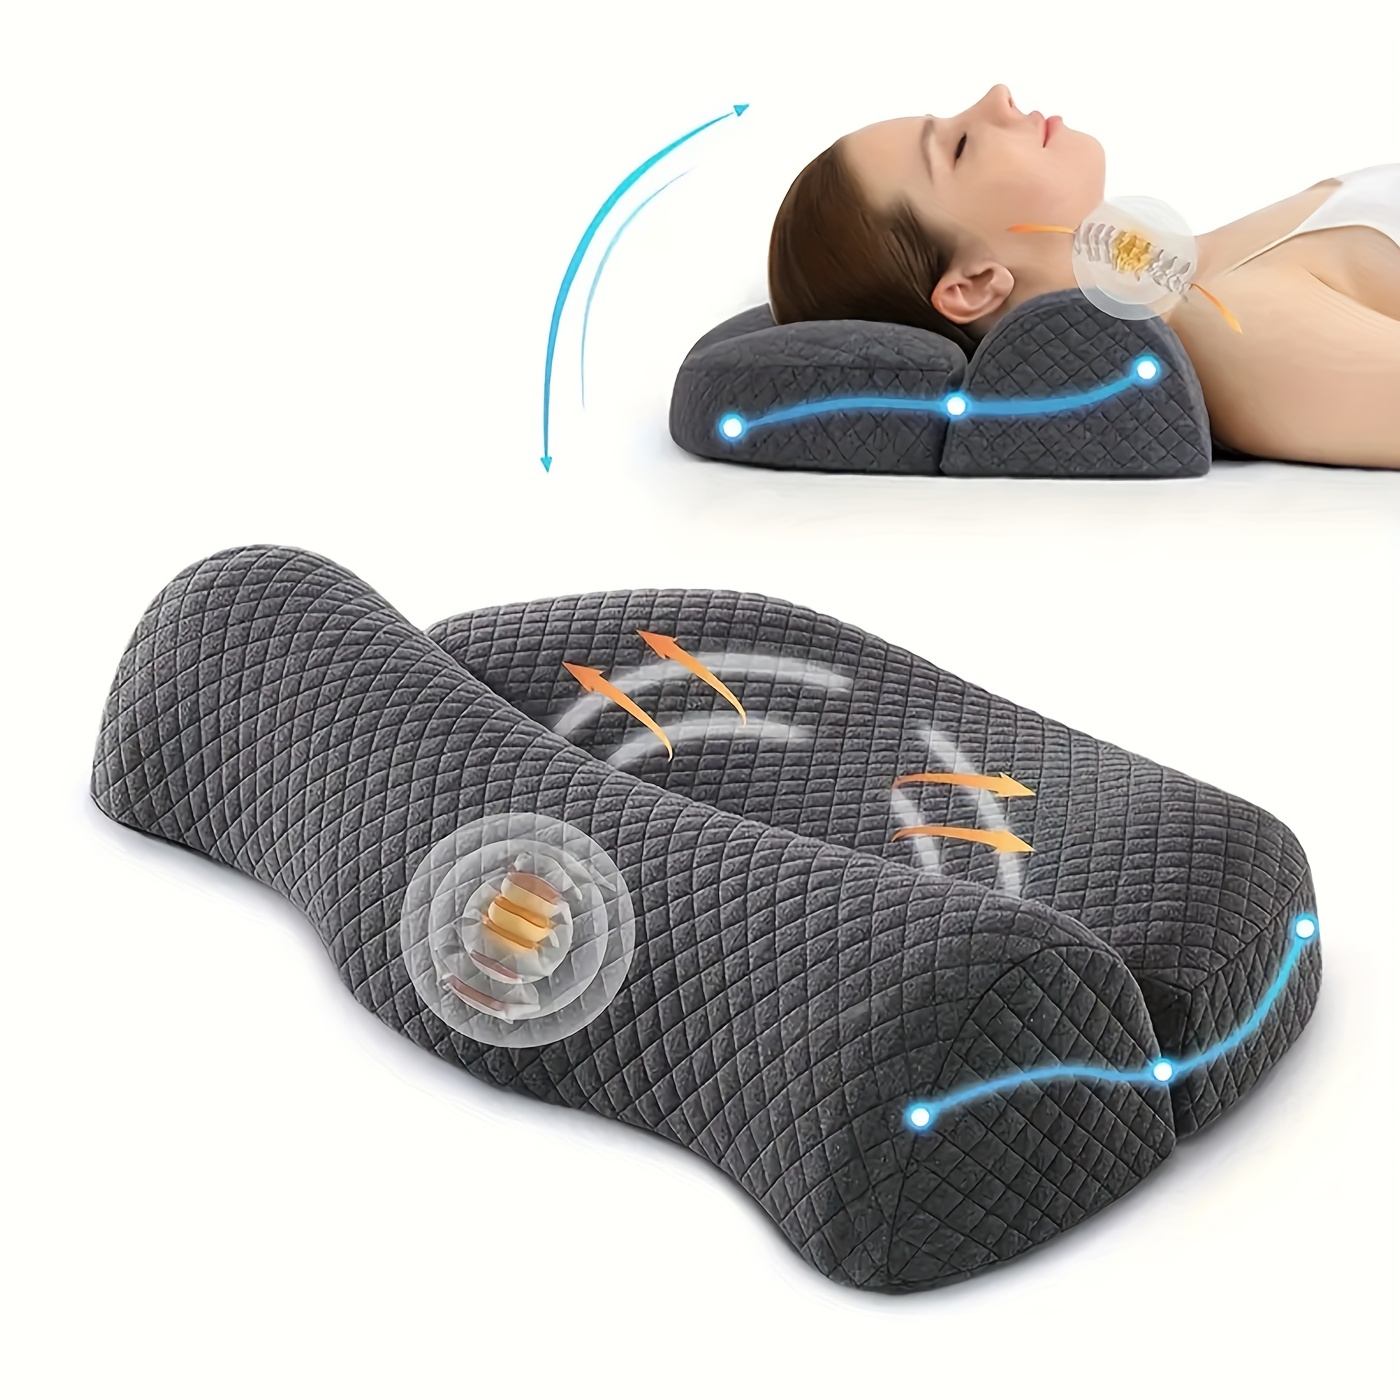 

1pc Adjustable Memory Foam Neck Pillow For Shoulder And Cervical Relax - Ergonomic Orthopedic Contour Support Pillow